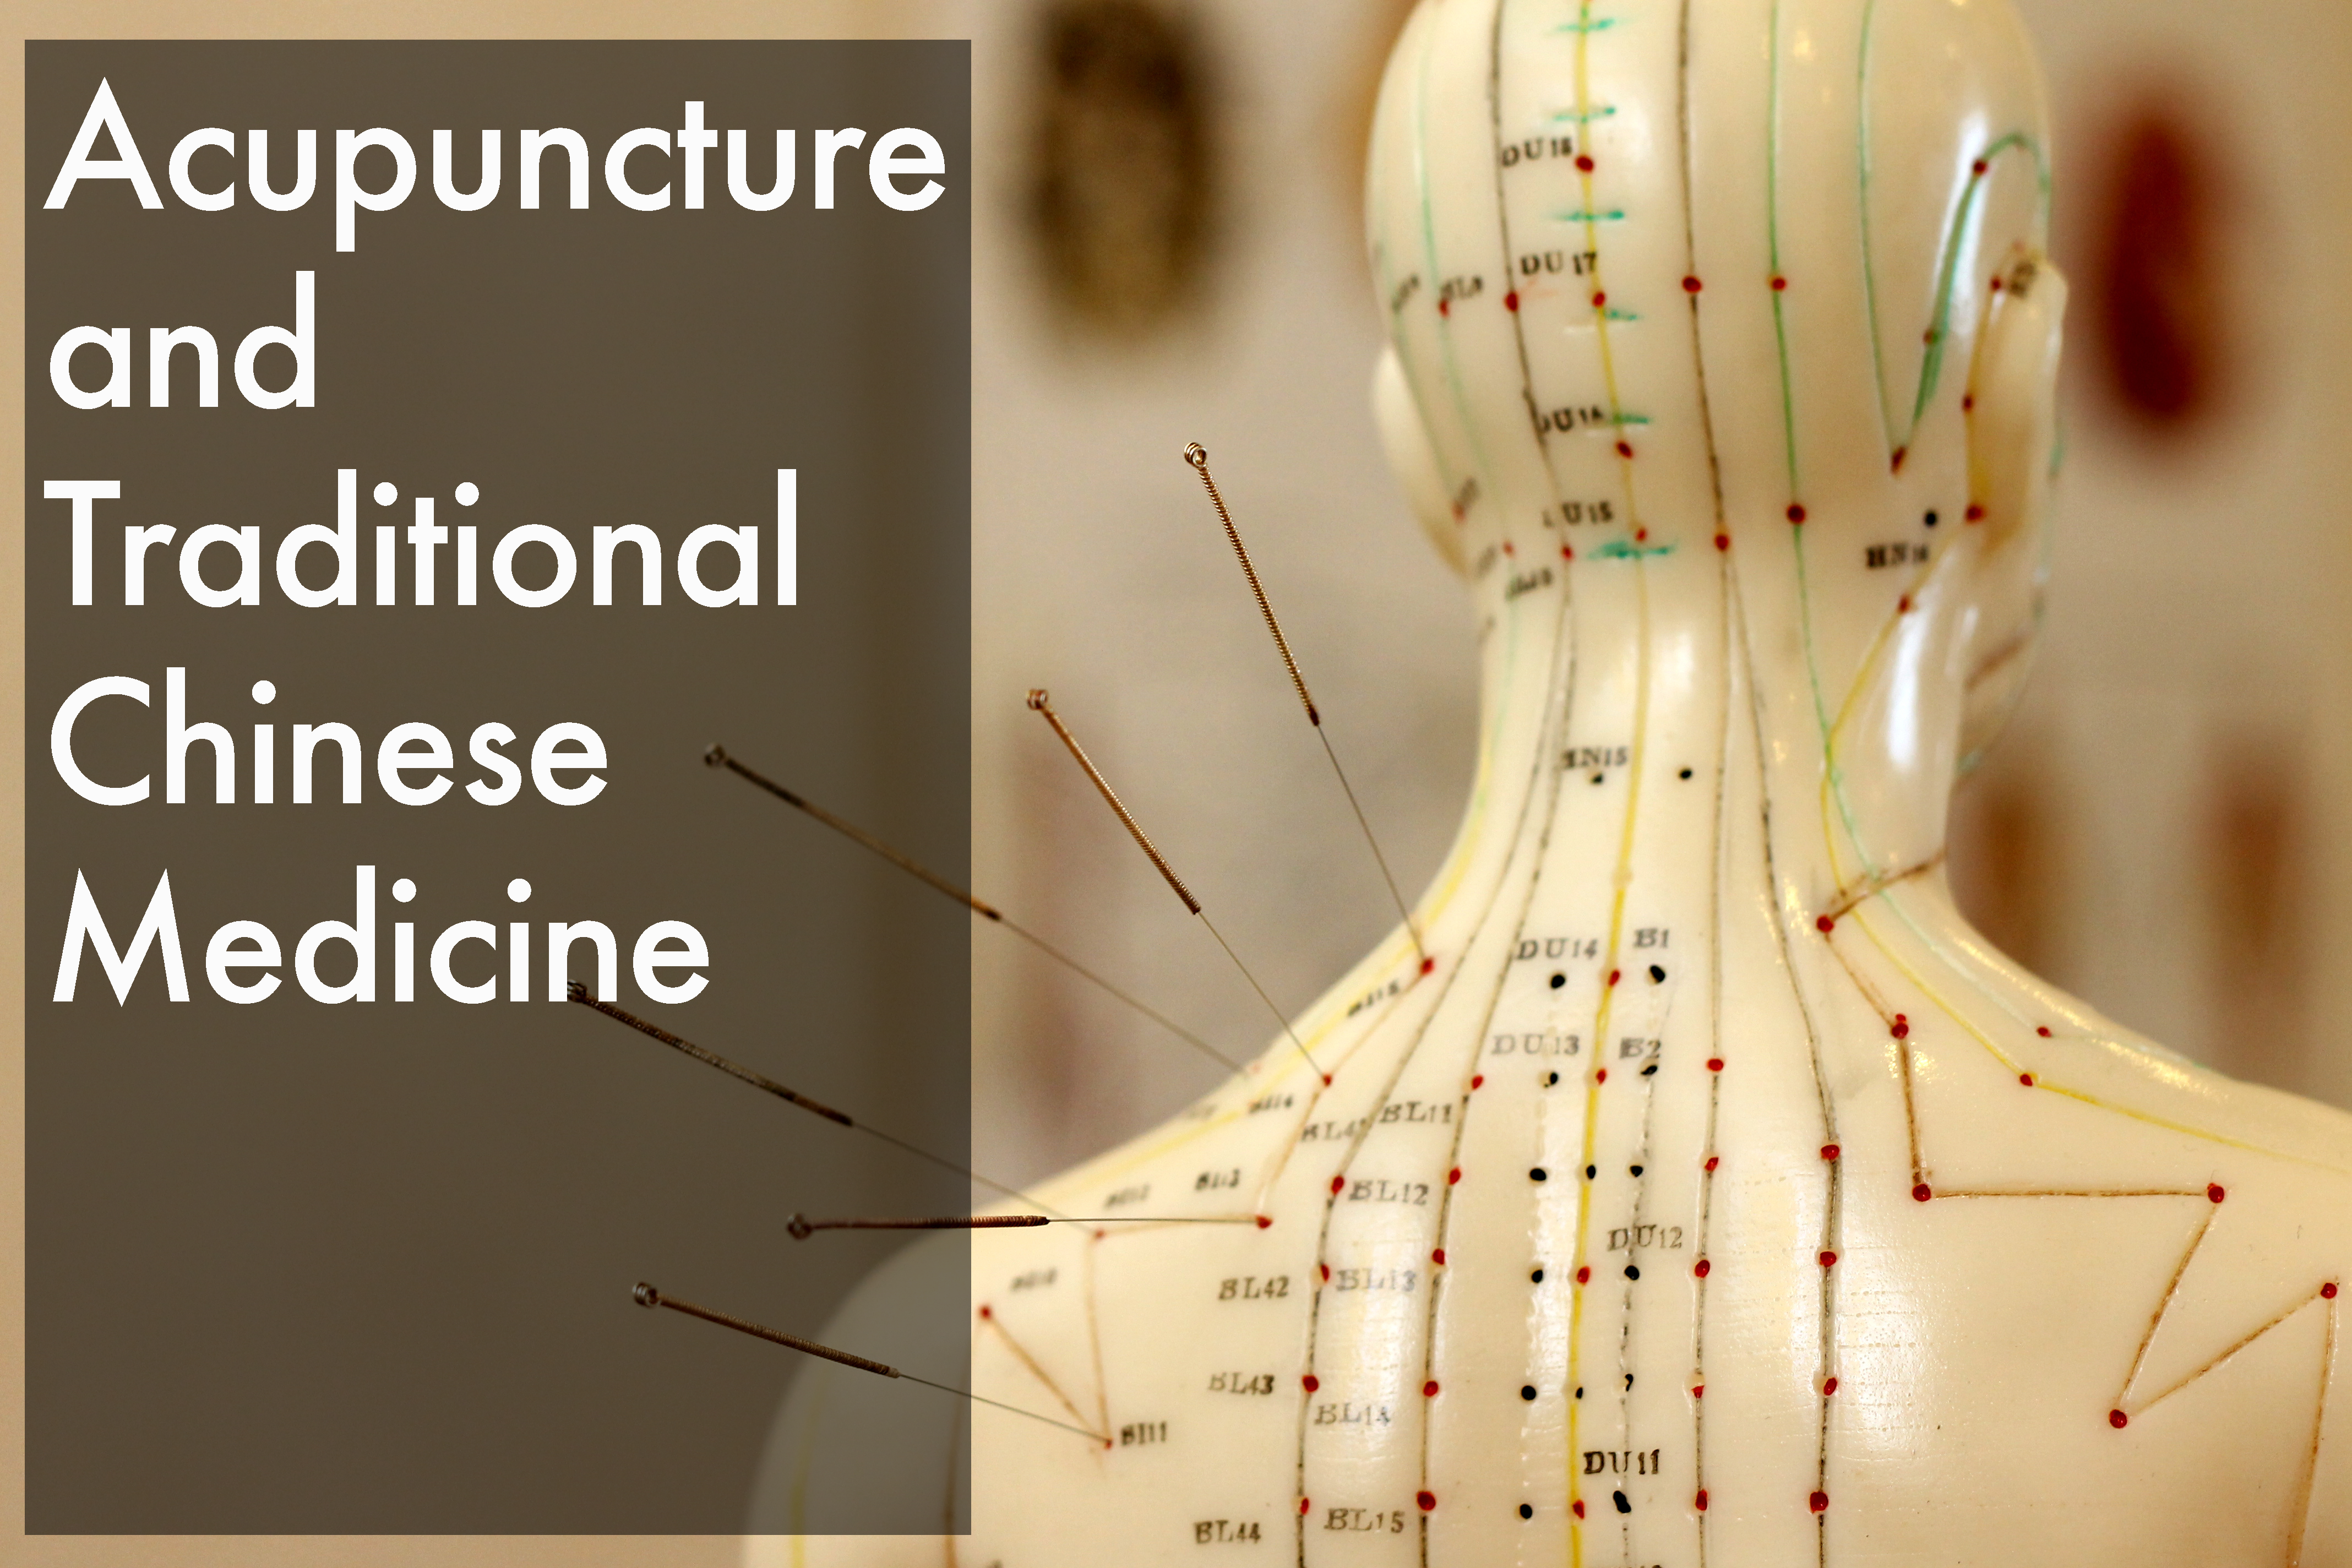 Similarities between Acupuncture and Traditional Chinese Medicine